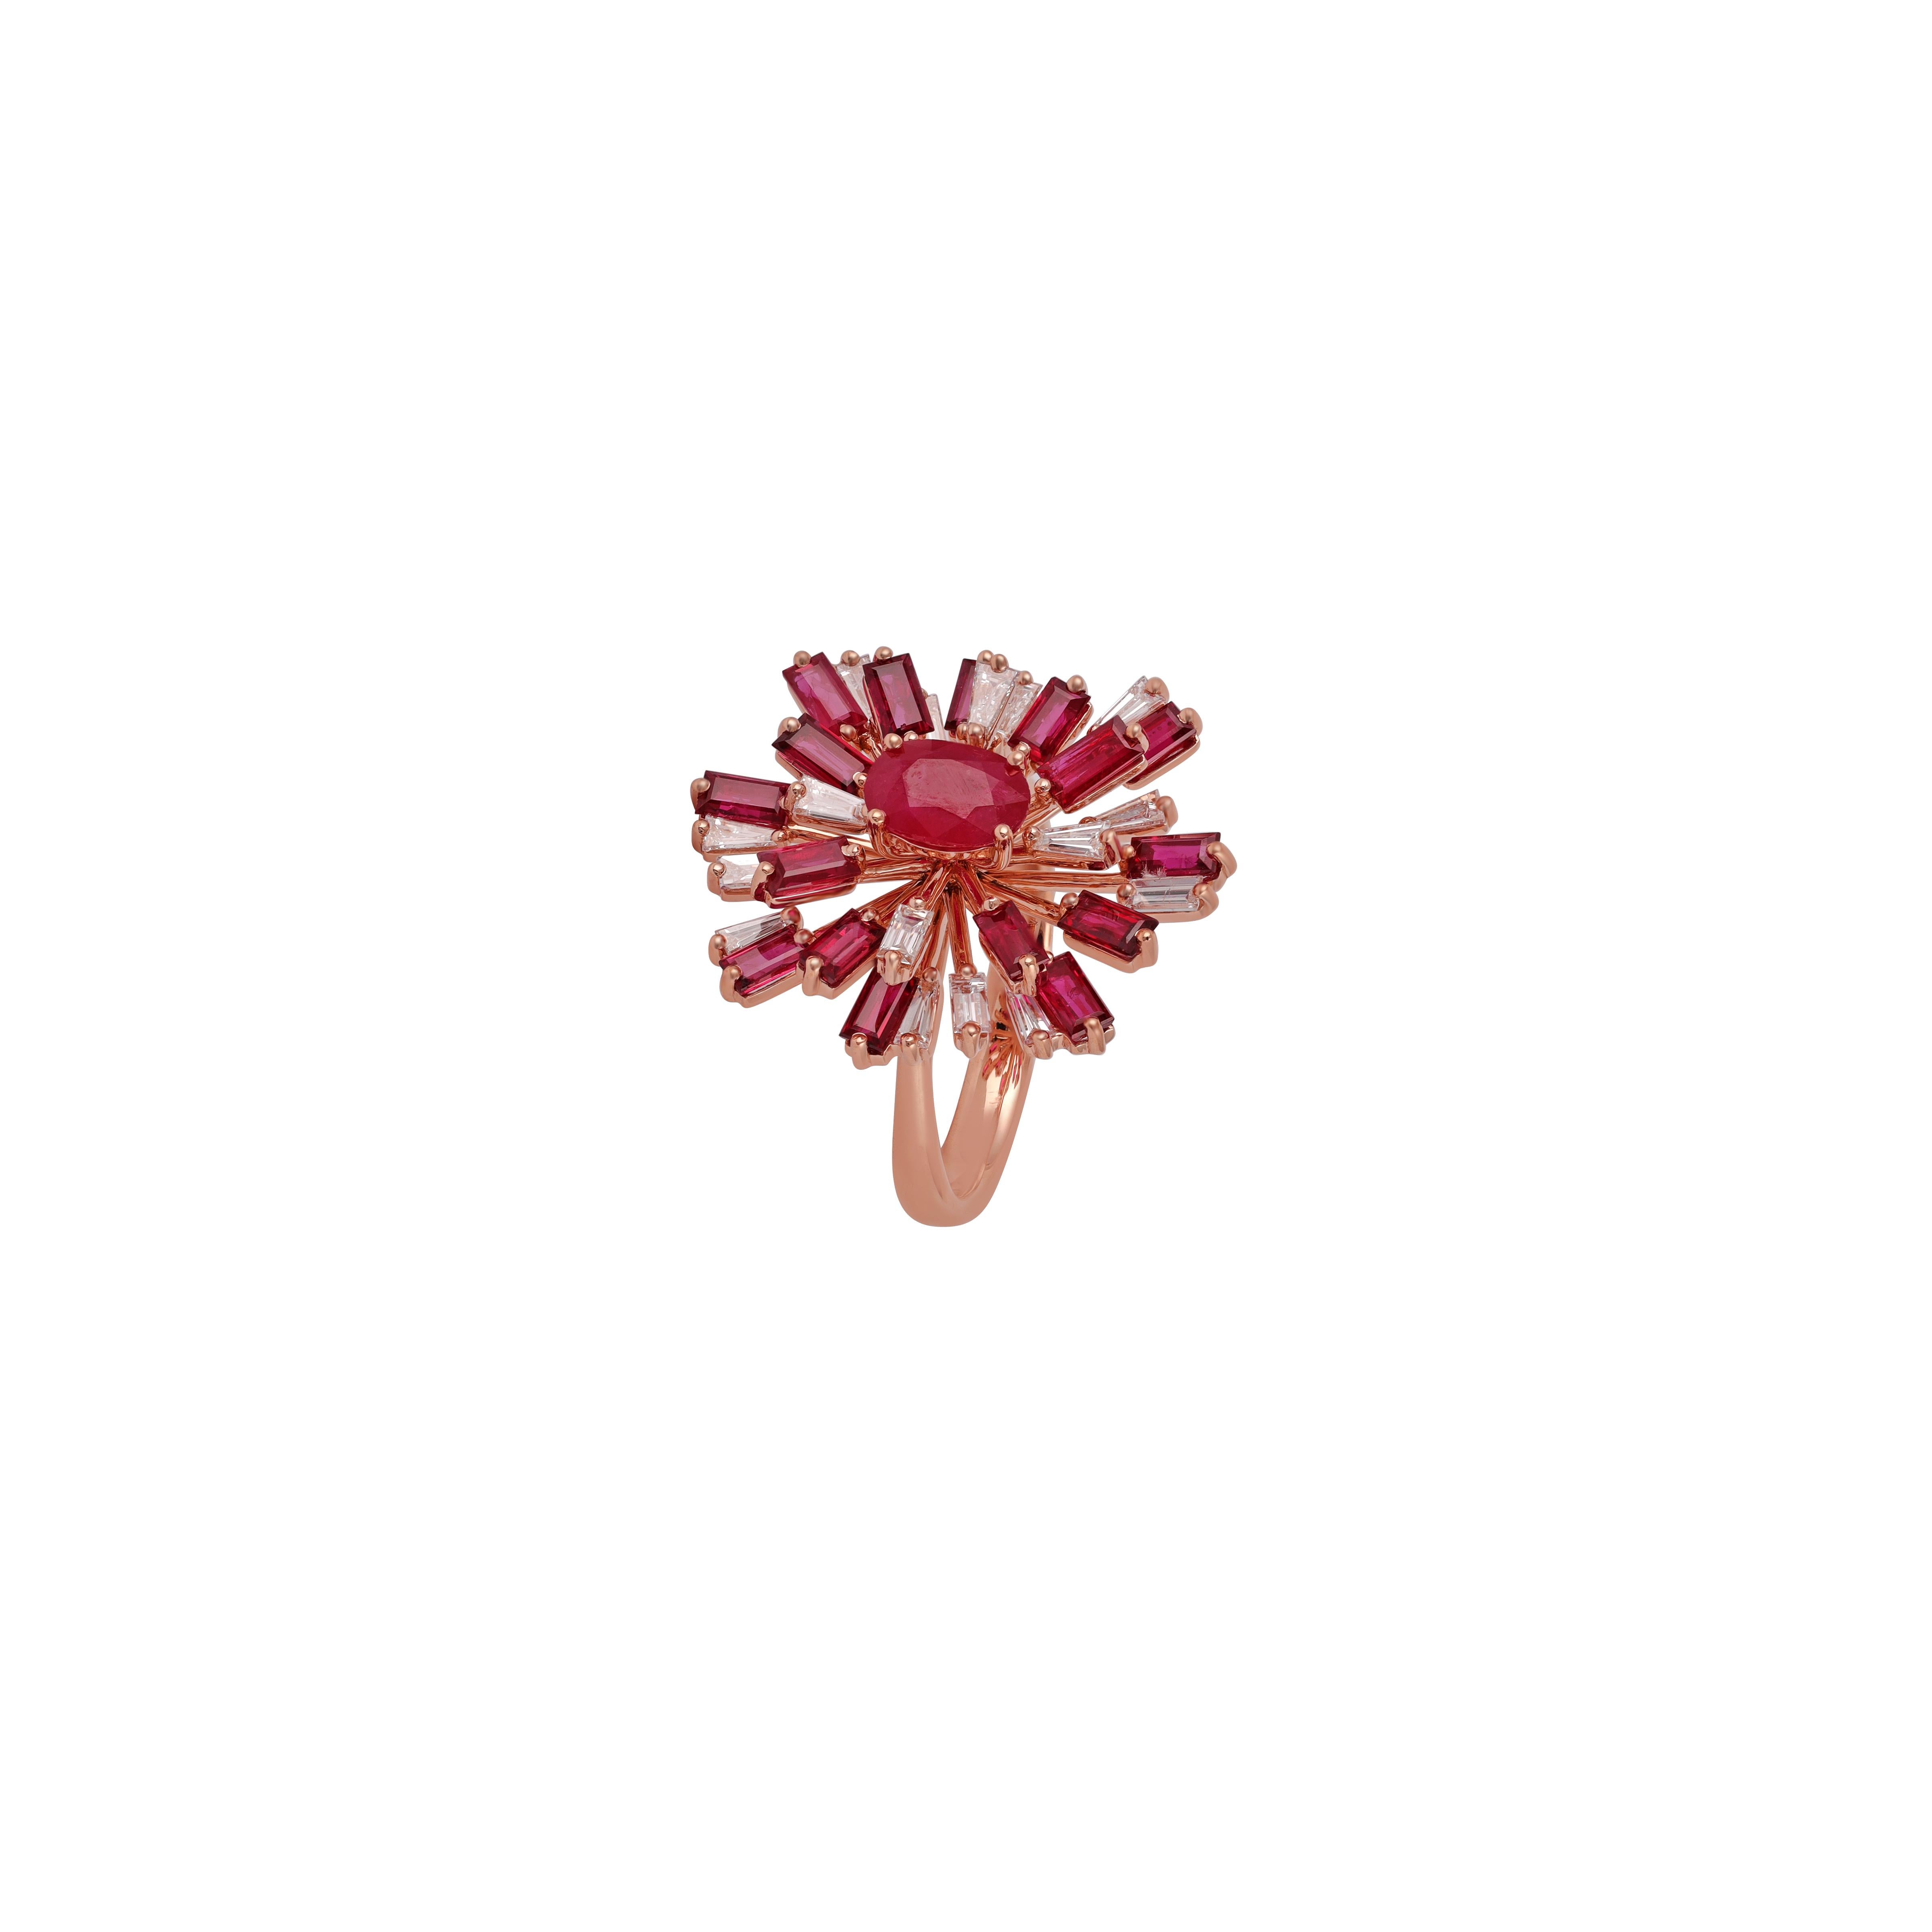 Contemporary Eye Catching Mozambique Ruby Ring For Sale